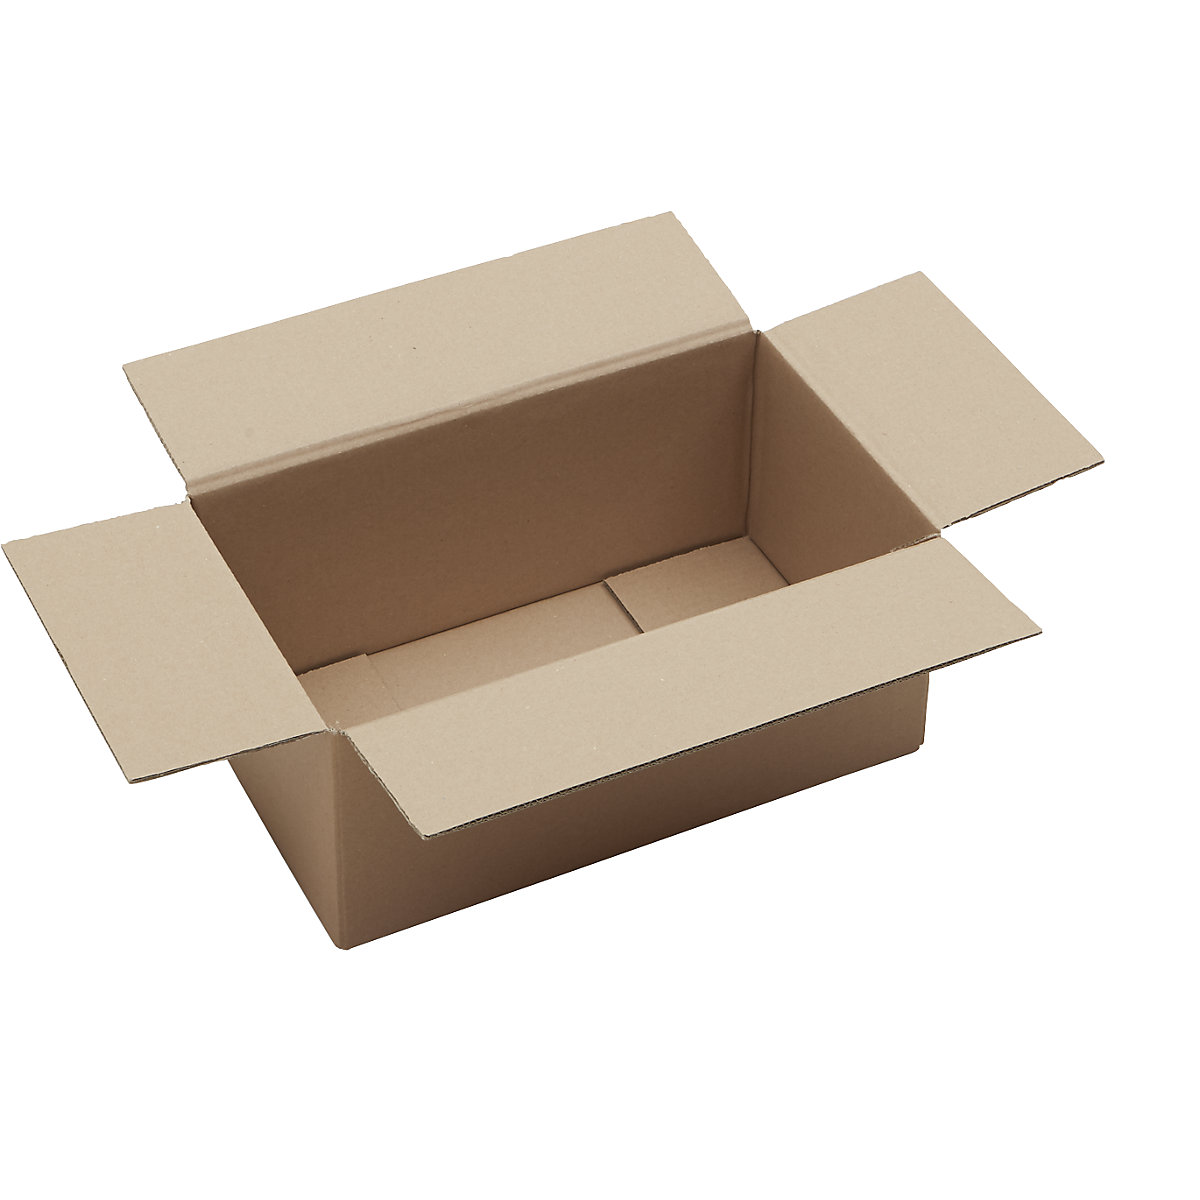 Corrugated cardboard folding boxes, FEFCO 0201, double fluted, pack of 50, internal dimensions 350 x 200 x 150 mm-9